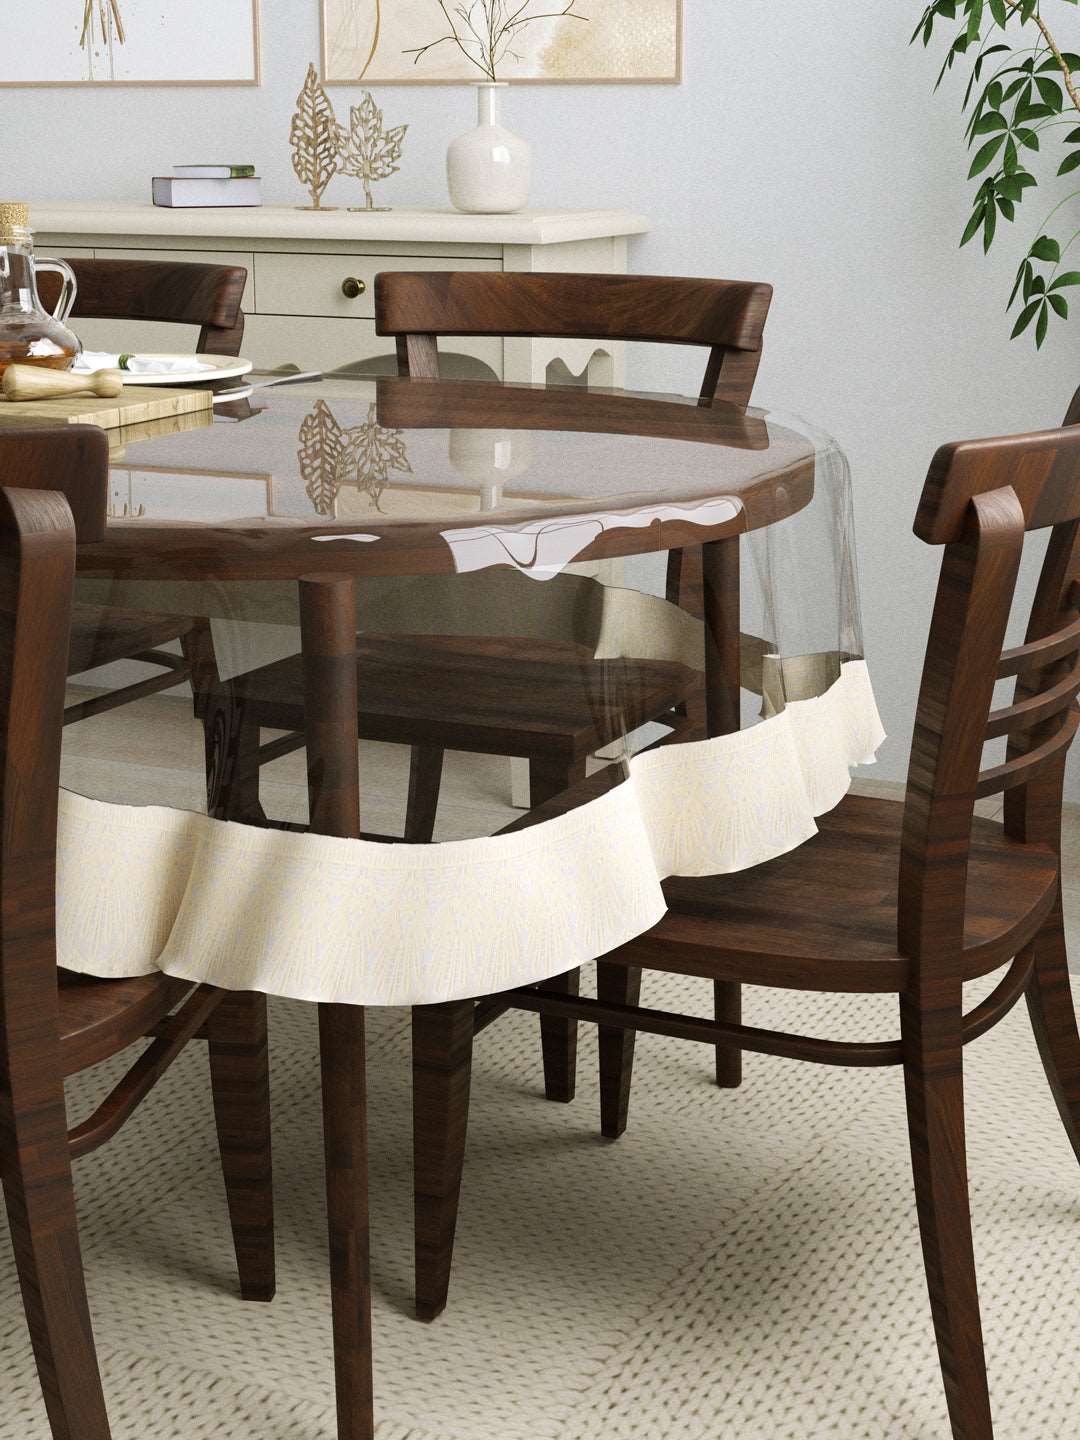 6 Seater Oval Anti Slip Transparent Dining Table Cover; 60x90 Inches; Material - PVC; Cream Lace